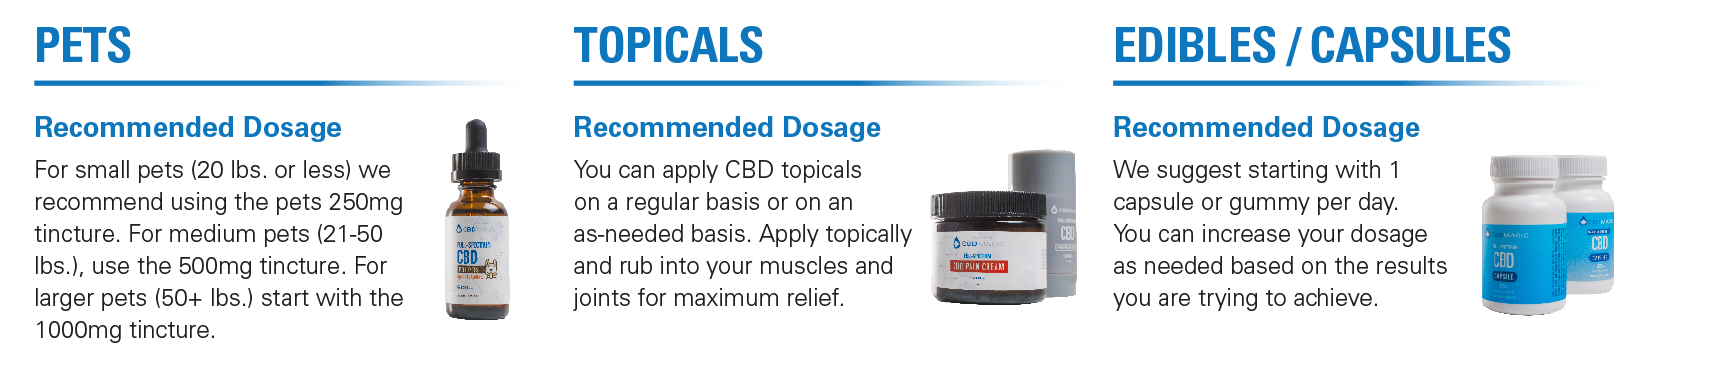 CBDMagic Dosage Guide Products